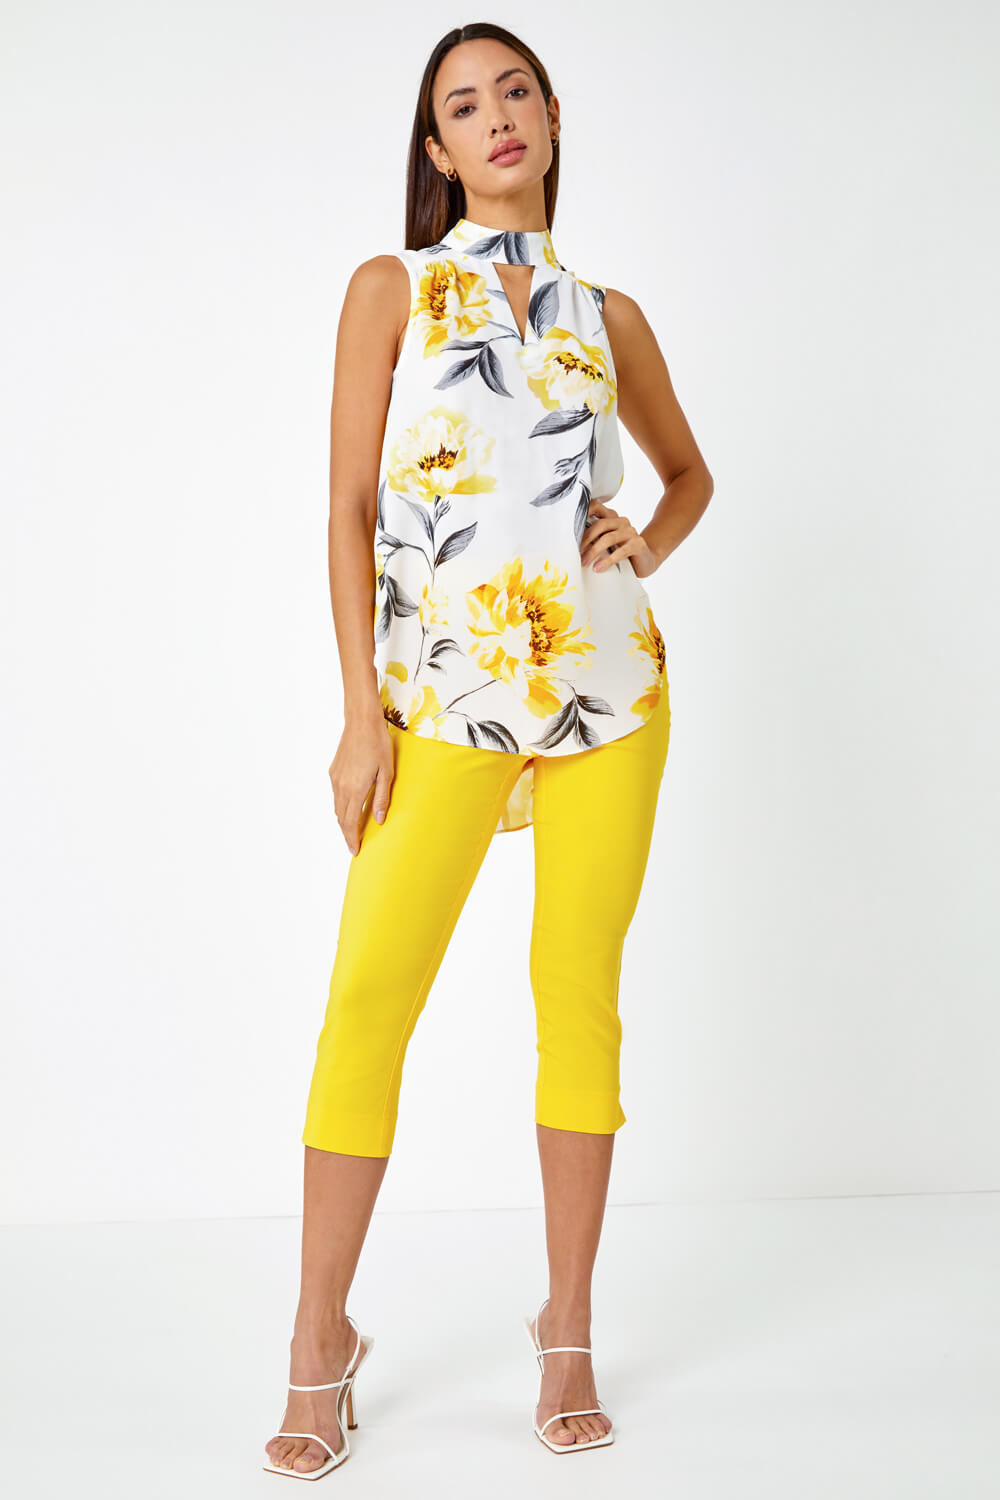 Yellow Floral Print High Neck Sleeveless Top, Image 4 of 5